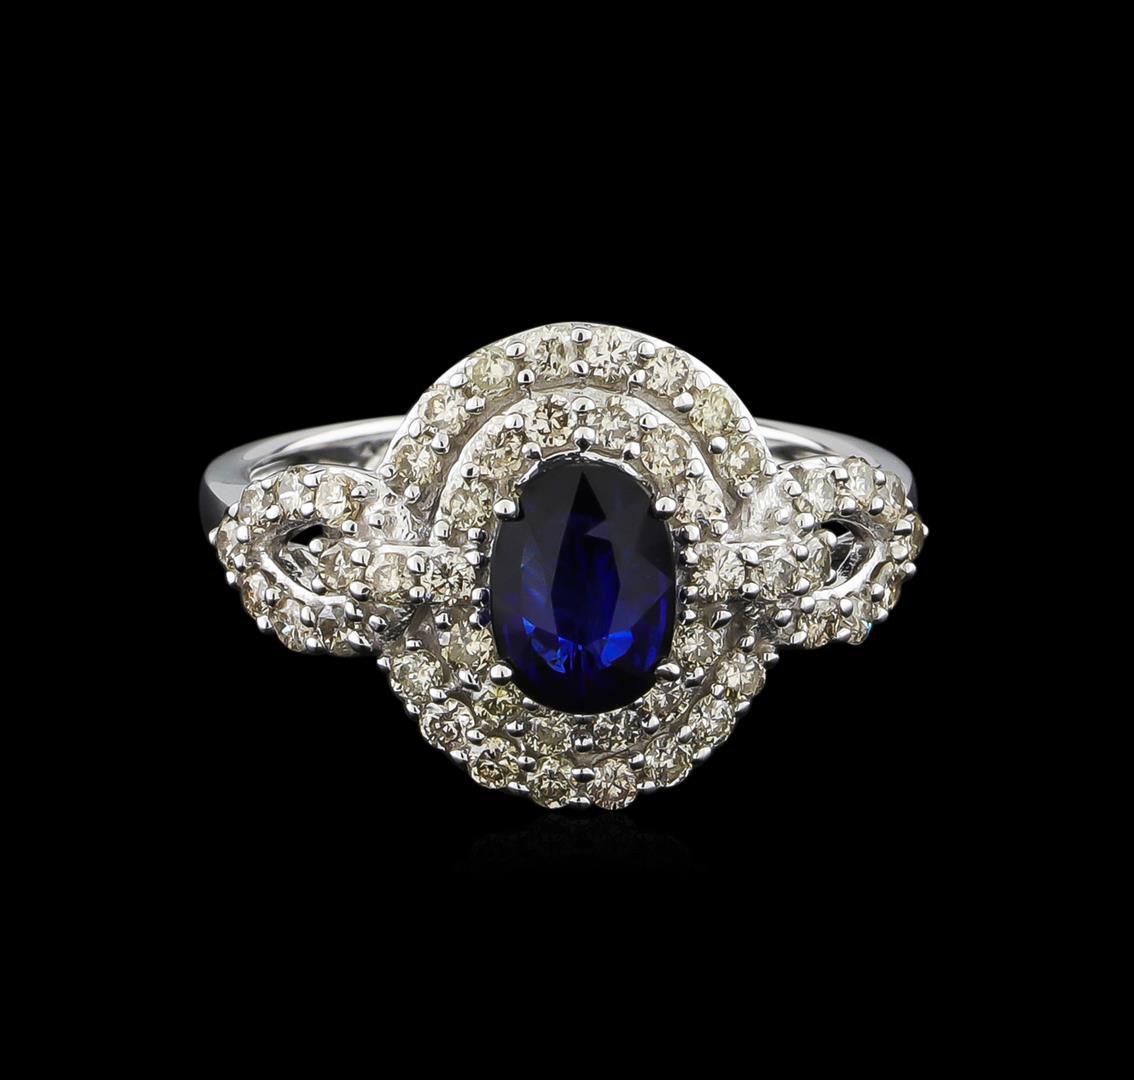 14KT White Gold 1.02 ctw Sapphire and Diamond Ring